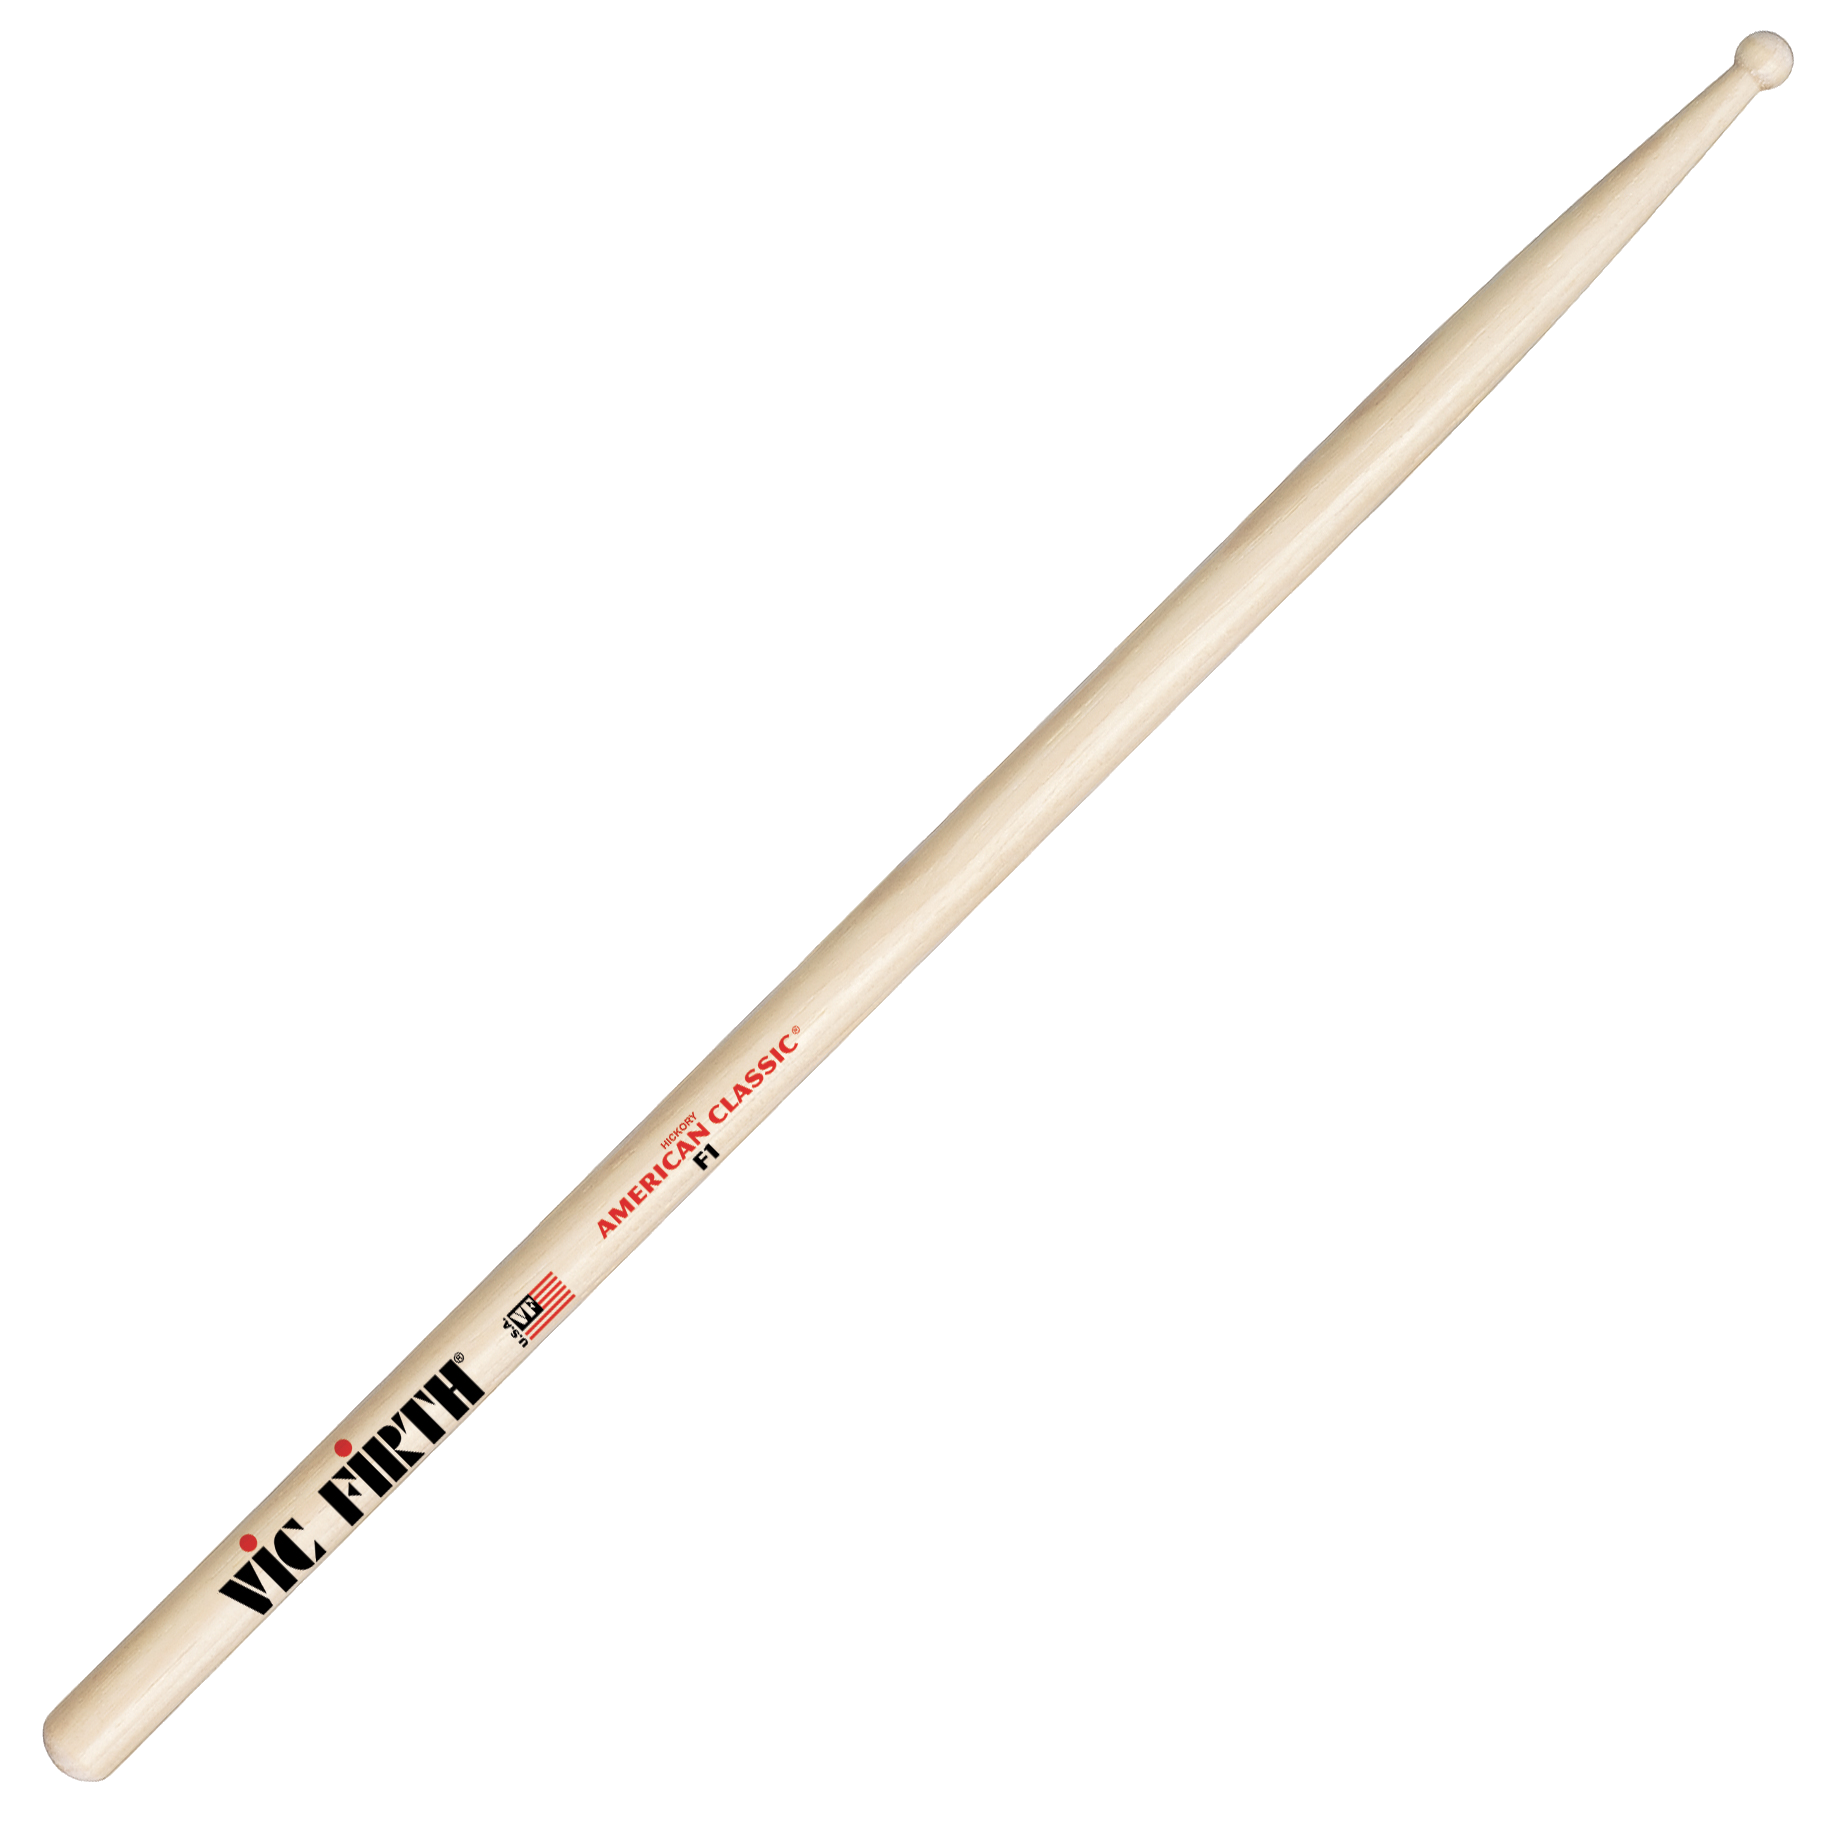 Vic Firth American Classic F1 Fusion Hickory - Drum stick - Variation 1